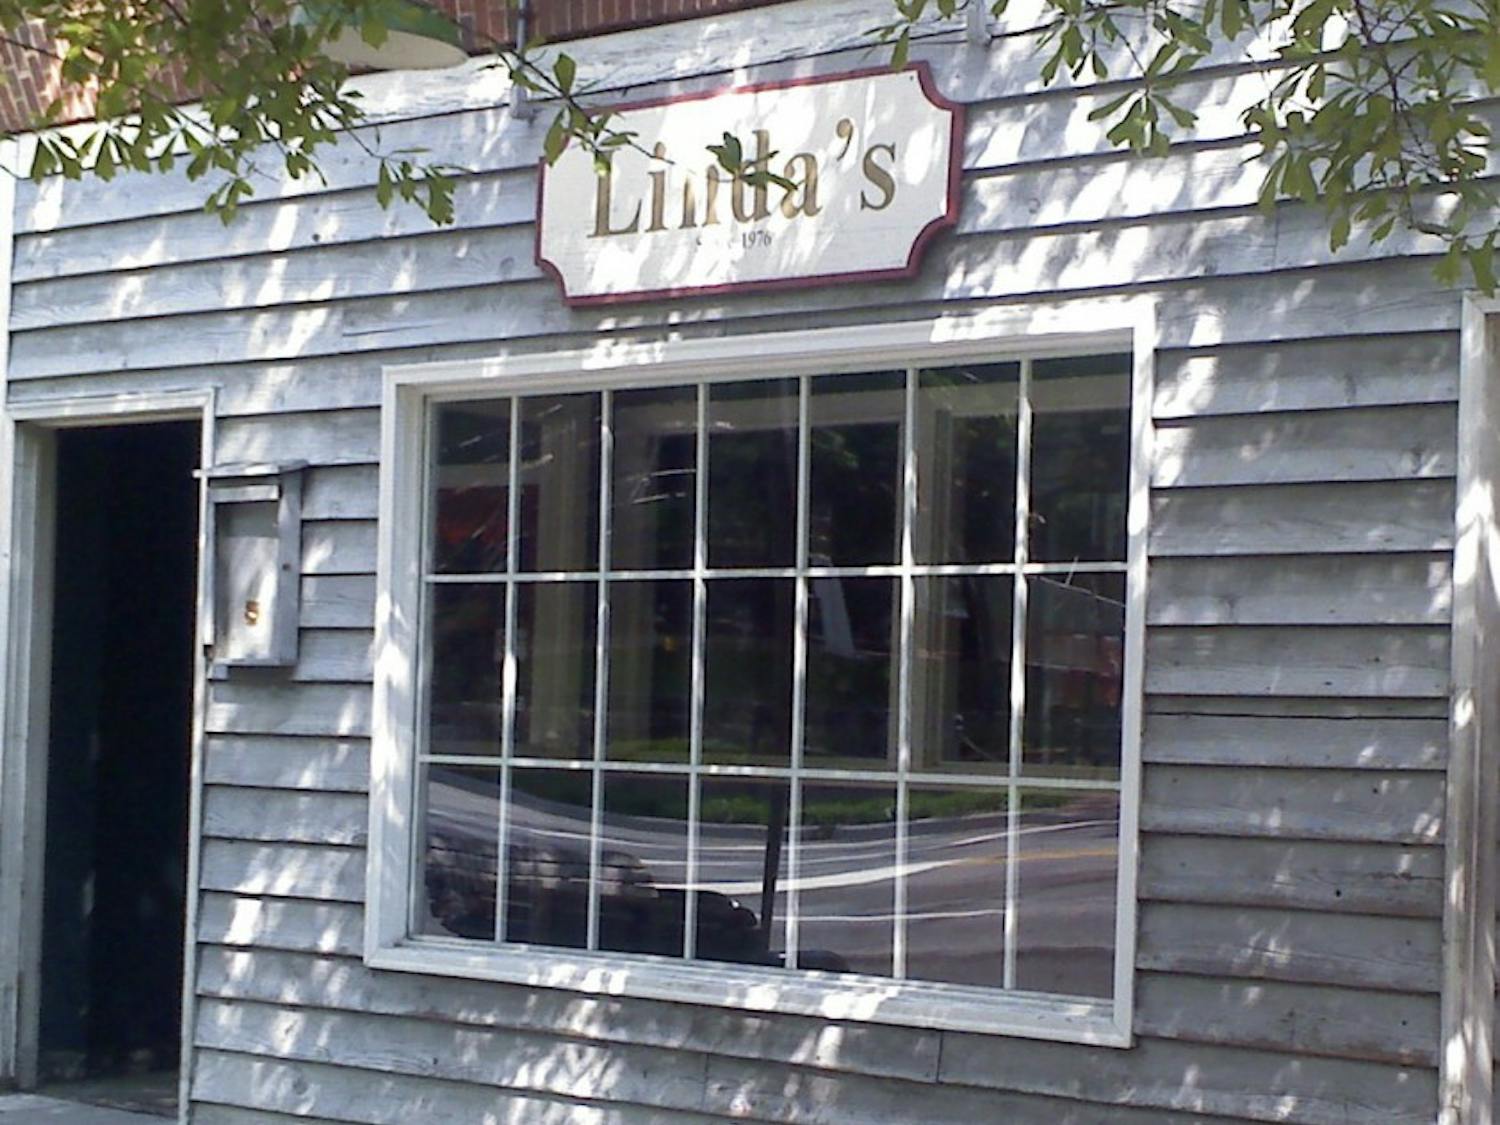 Linda's Bar and Grill&nbsp;is a local favorite for food and drinks.